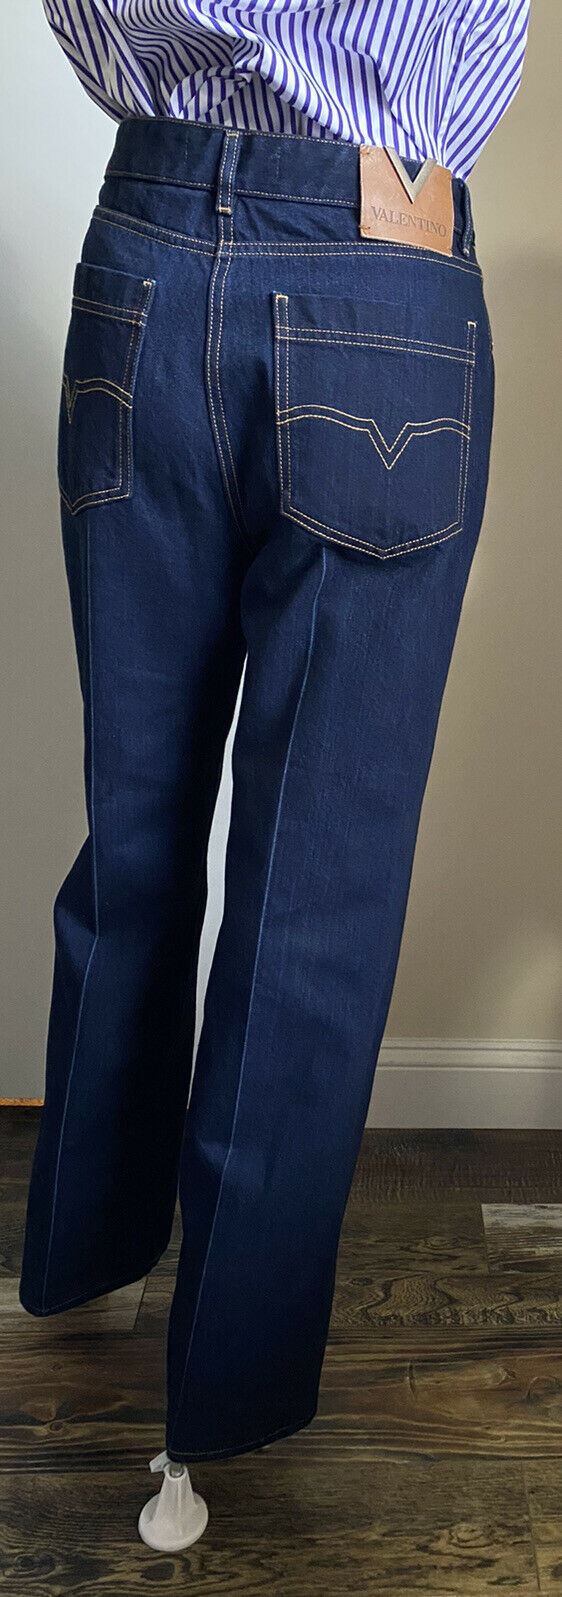 New $1200 Valentino Women's Crop Denim Flare Jeans Pants Blue 32 Italy